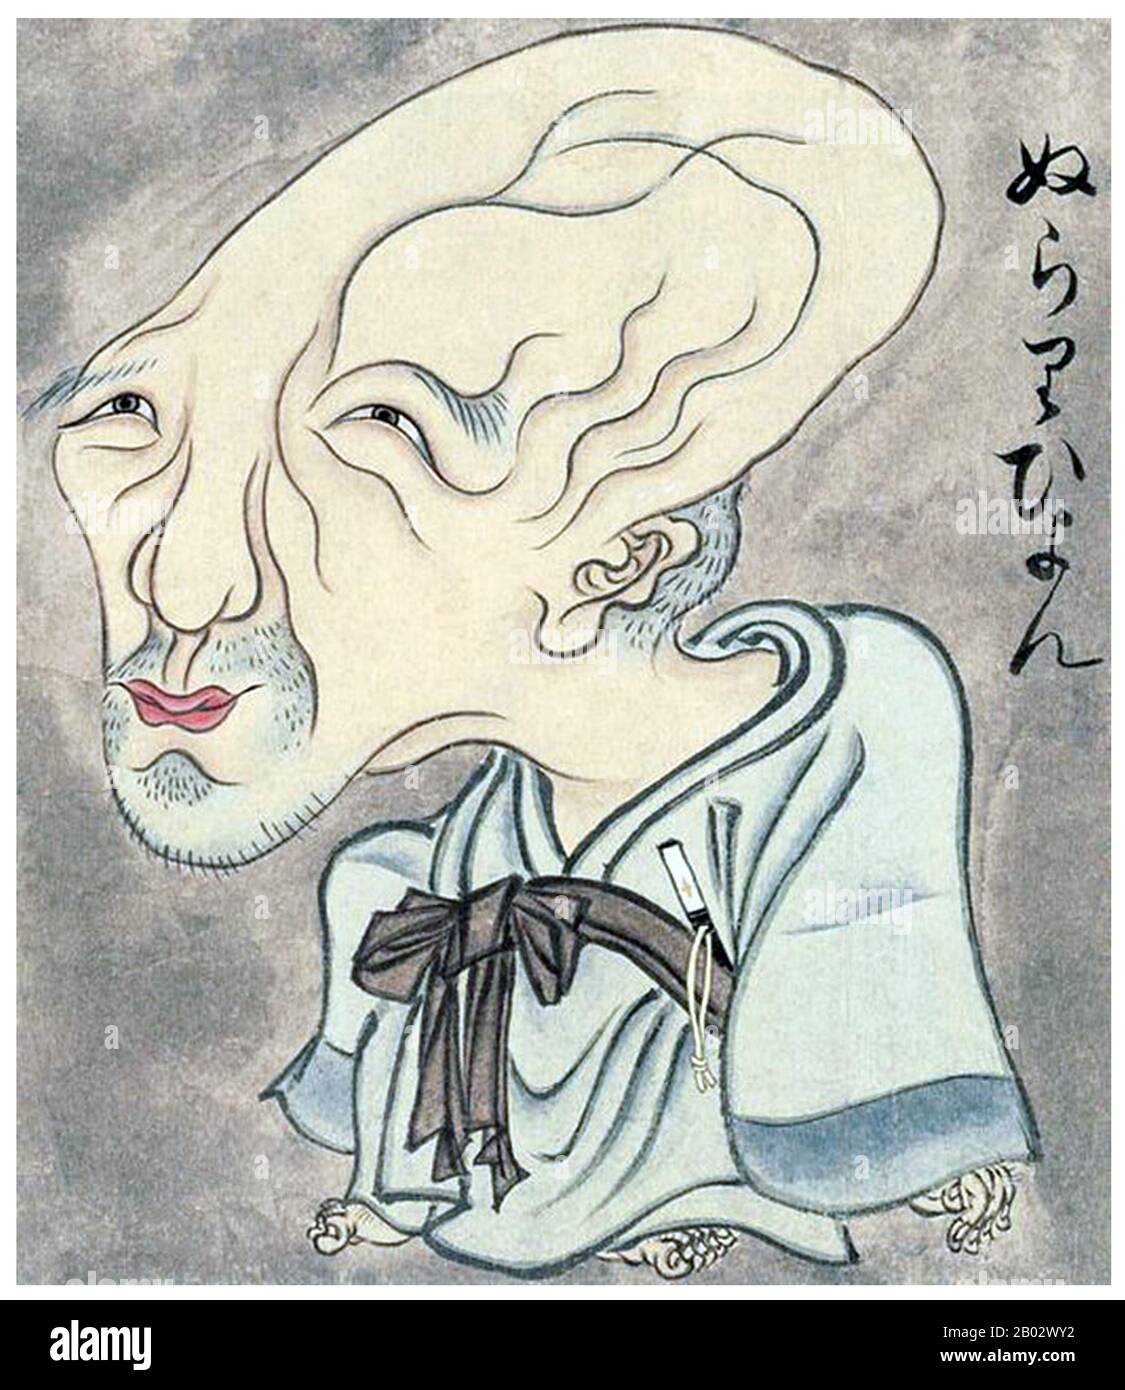 Nurarihyon or Nurihyon is a Japanese yokai (a supernatural monster in folklore) said to originate from Wakayama Prefecture. Nurarihyon is usually depicted as an old man with a gourd-shaped head and wearing a kesa robe. He is sometimes said to be leader of the yōkai.  Nurarihyon will sneak into someone's house while they are away, drink their tea, and act as if it is his own house. Because it looks human, anyone who sees him will mistake him for the owner of the house, making it very hard to expel him. Nurarihyon is the leader of the Hyakki Yako Night Parade of 100 Demons. Stock Photo